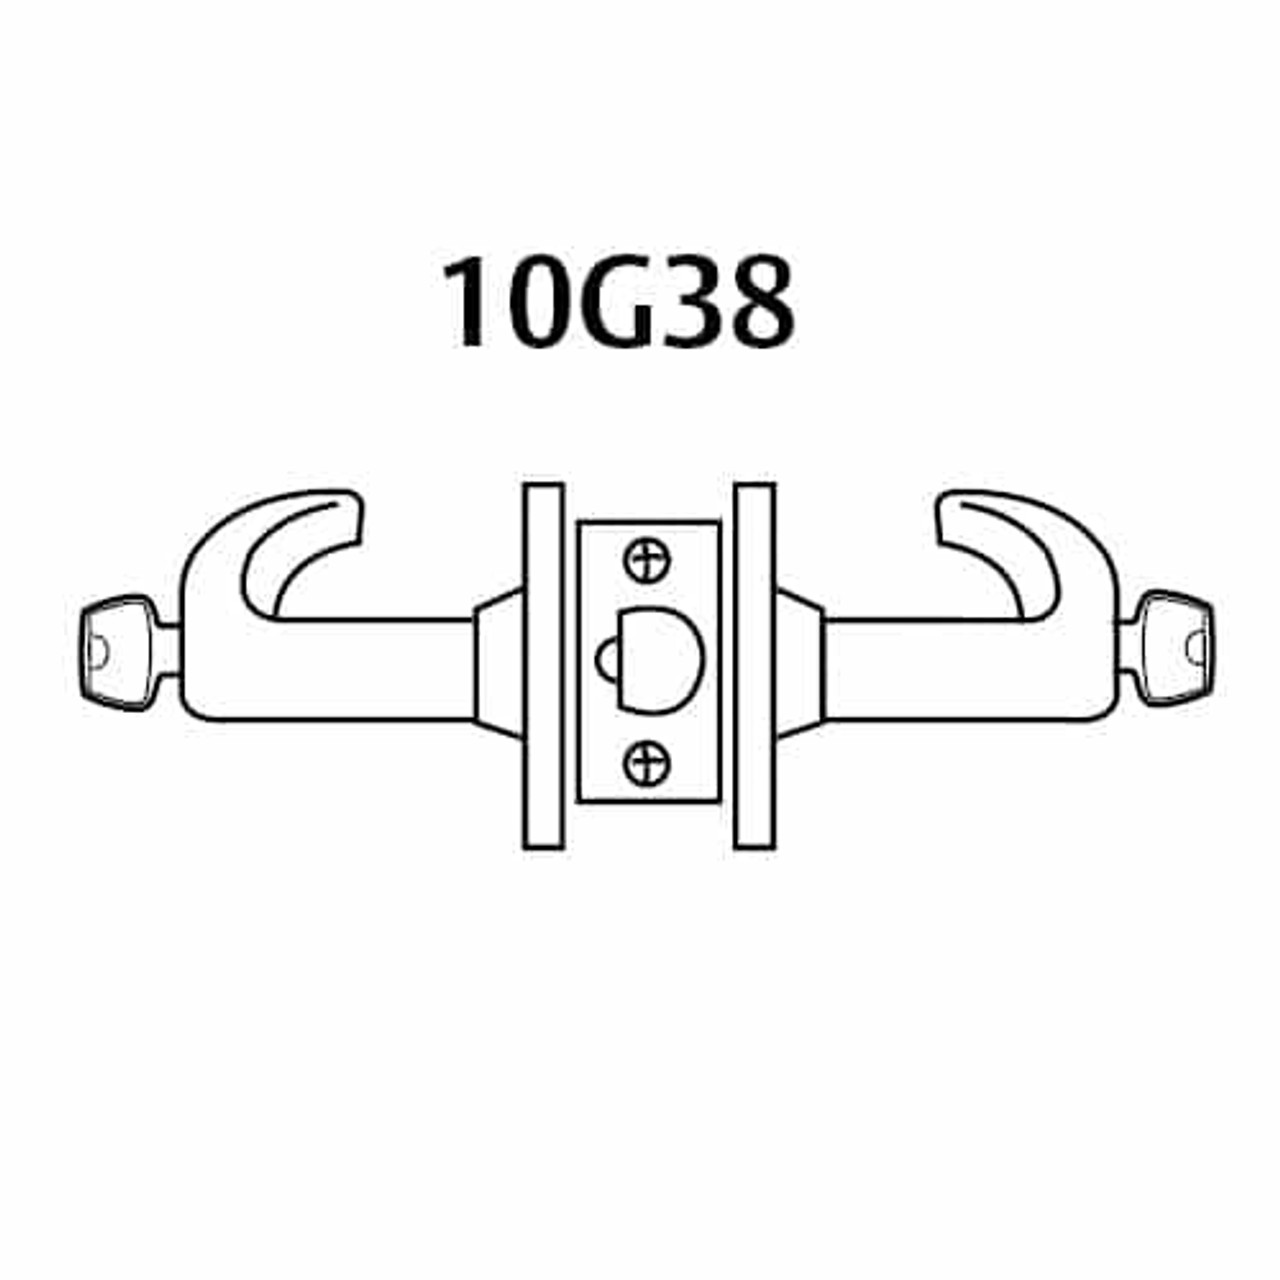 2860-10G38-GB-26D Sargent 10 Line Cylindrical Classroom Locks with B Lever Design and G Rose Prepped for LFIC in Satin Chrome